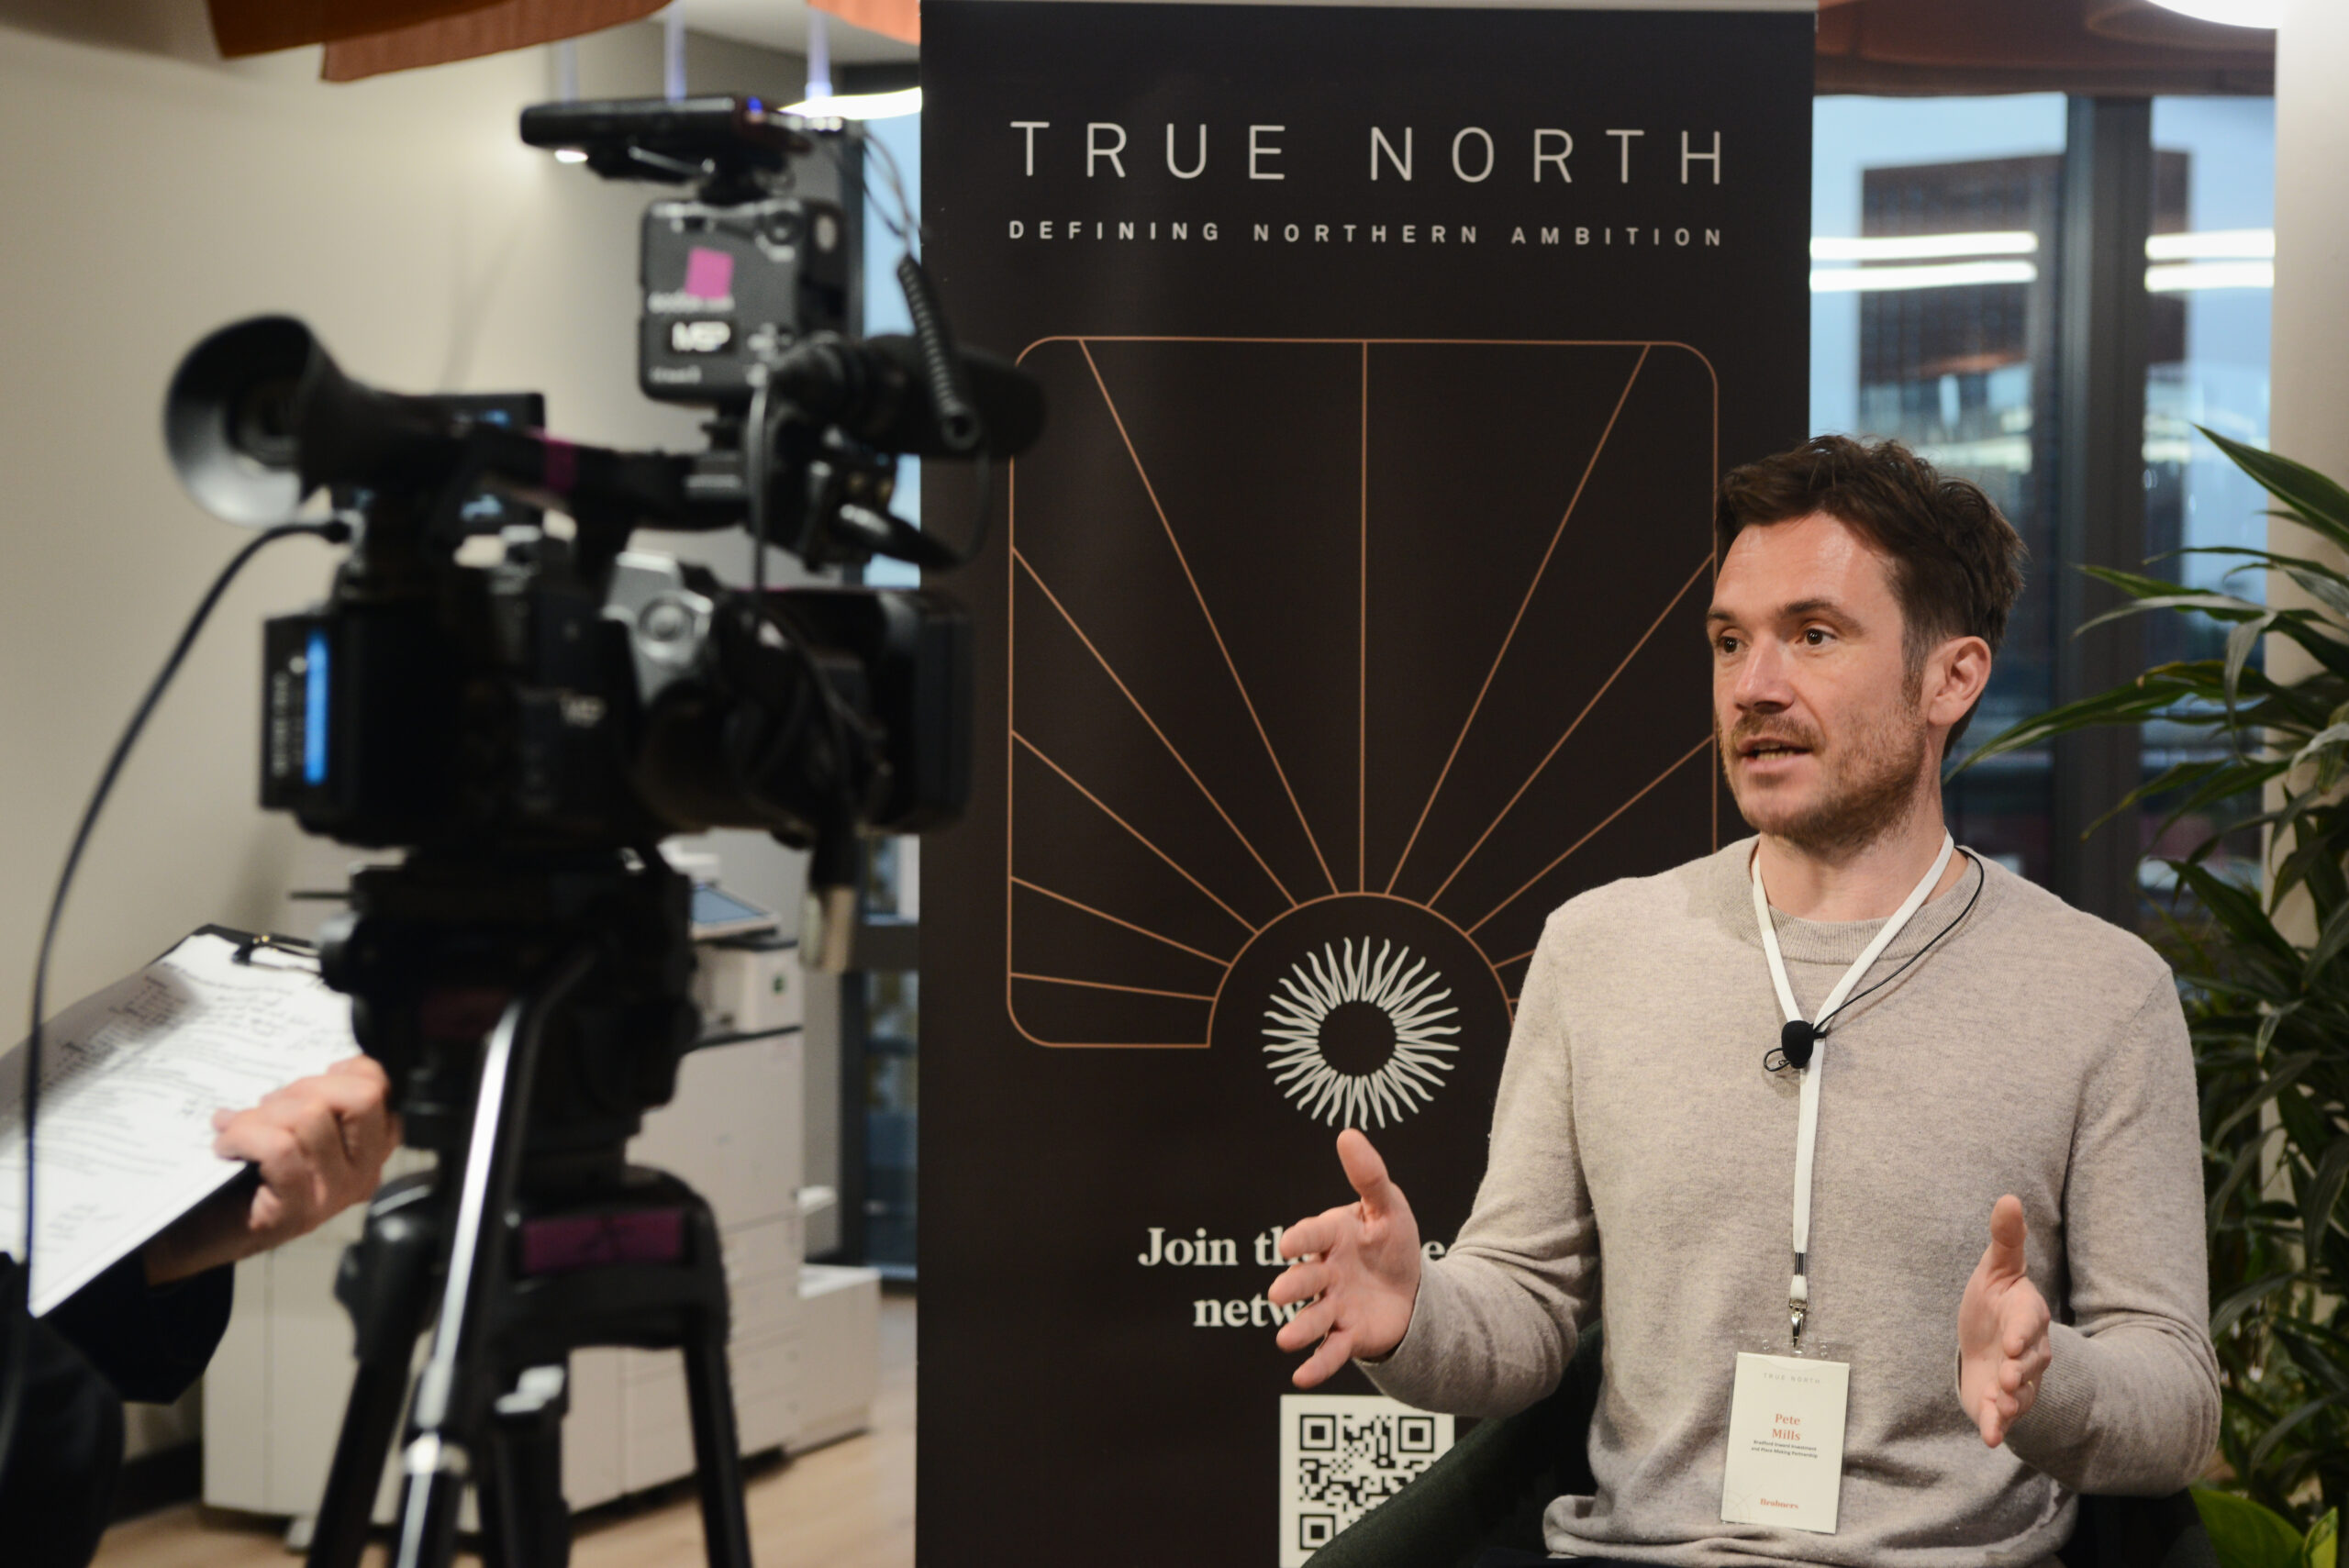 Defining Northern Ambition: Brabners launches True North report and network in Manchester